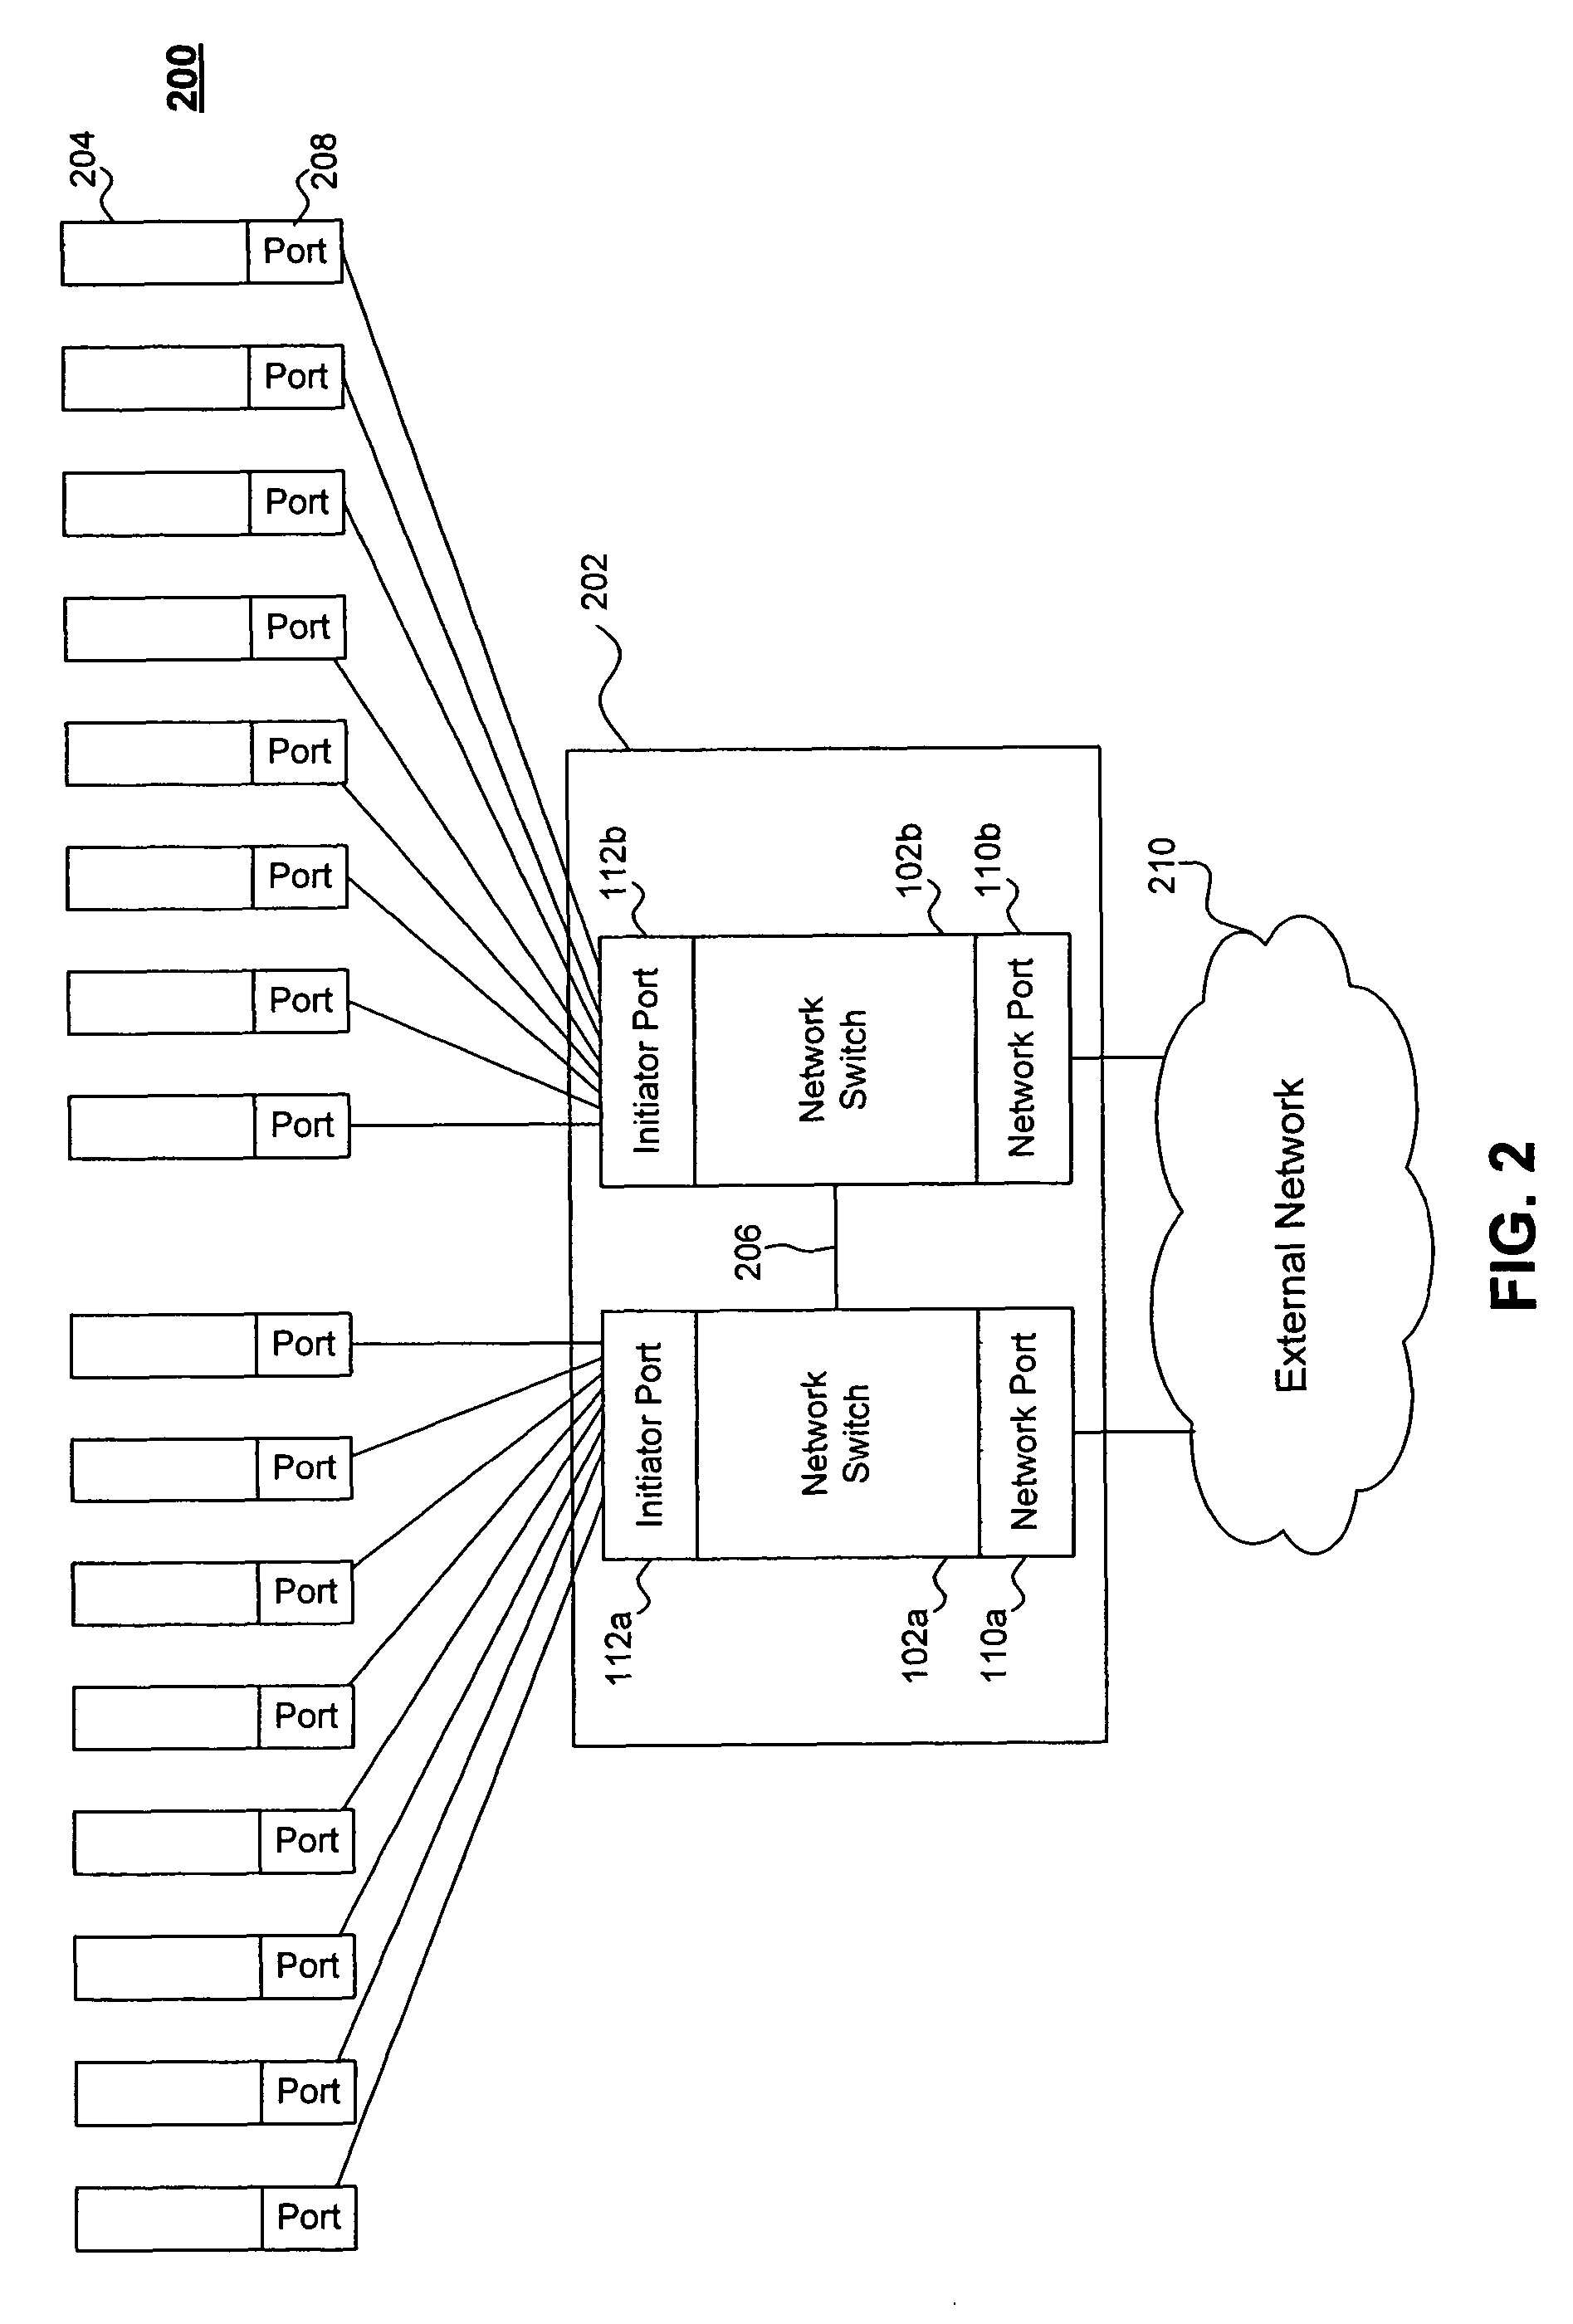 Apparatus and system for coupling and decoupling initiator devices to a network using an arbitrated loop without disrupting the network